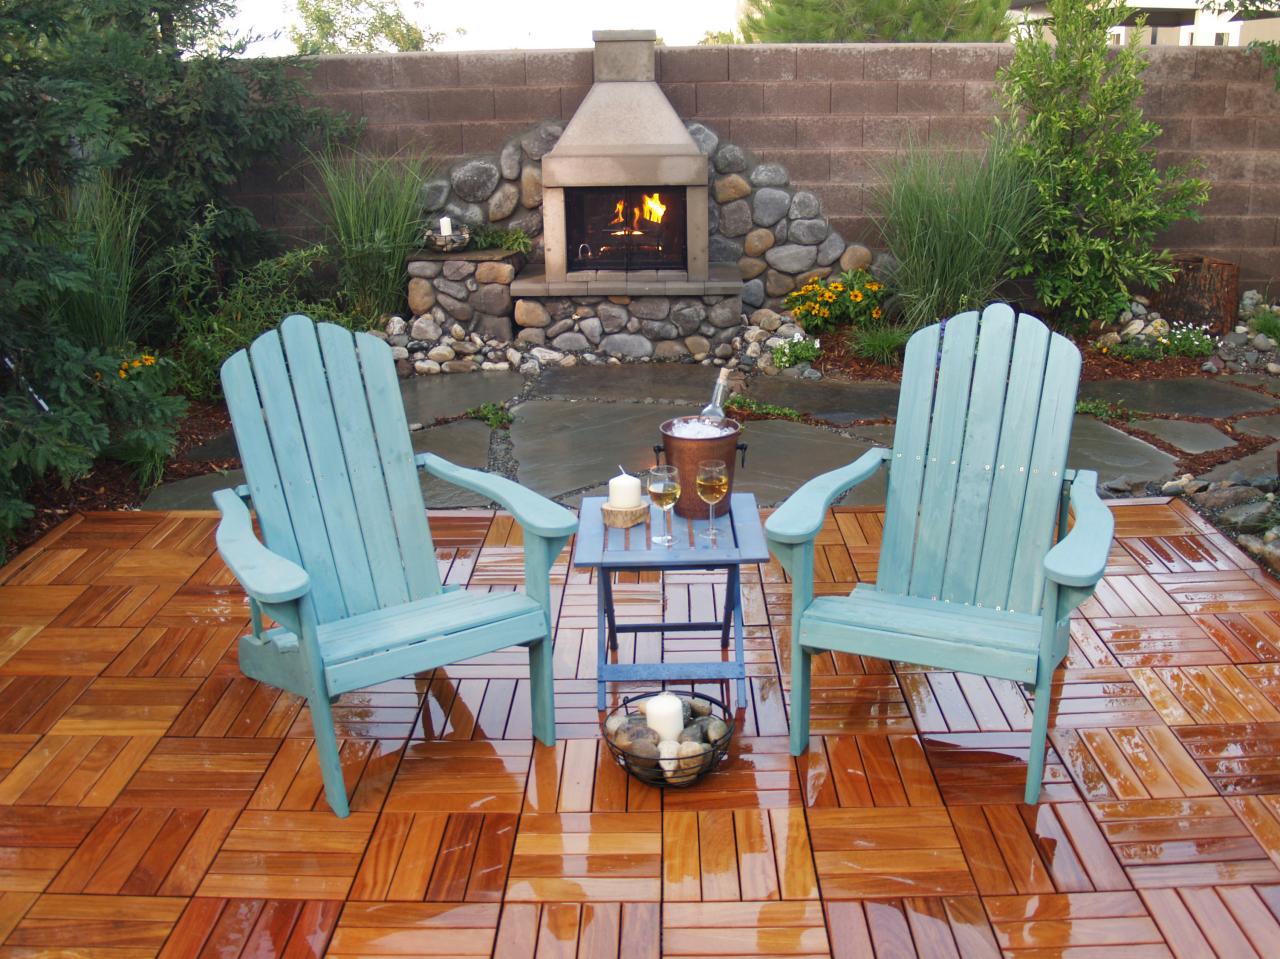 Find ideas for outdoor fire pit and fireplace designs that let you get as simple or as fancy as your time and budget allow